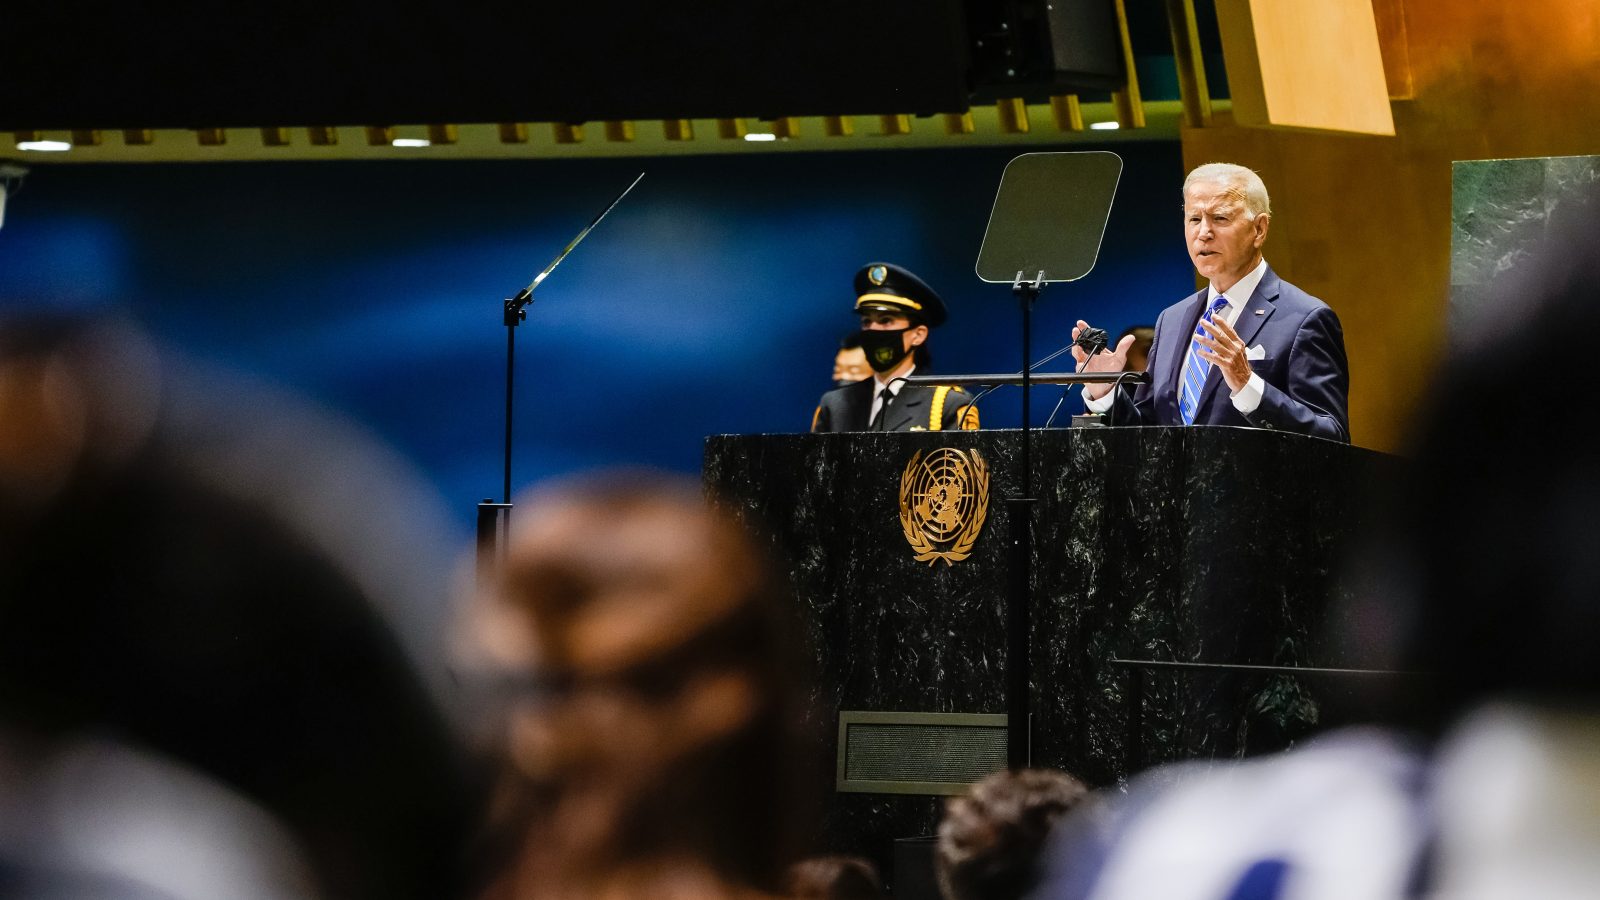 President Joe Biden delivers remarks at the United Nations General Assembly, Tuesday, September 21, 2021, in New York.